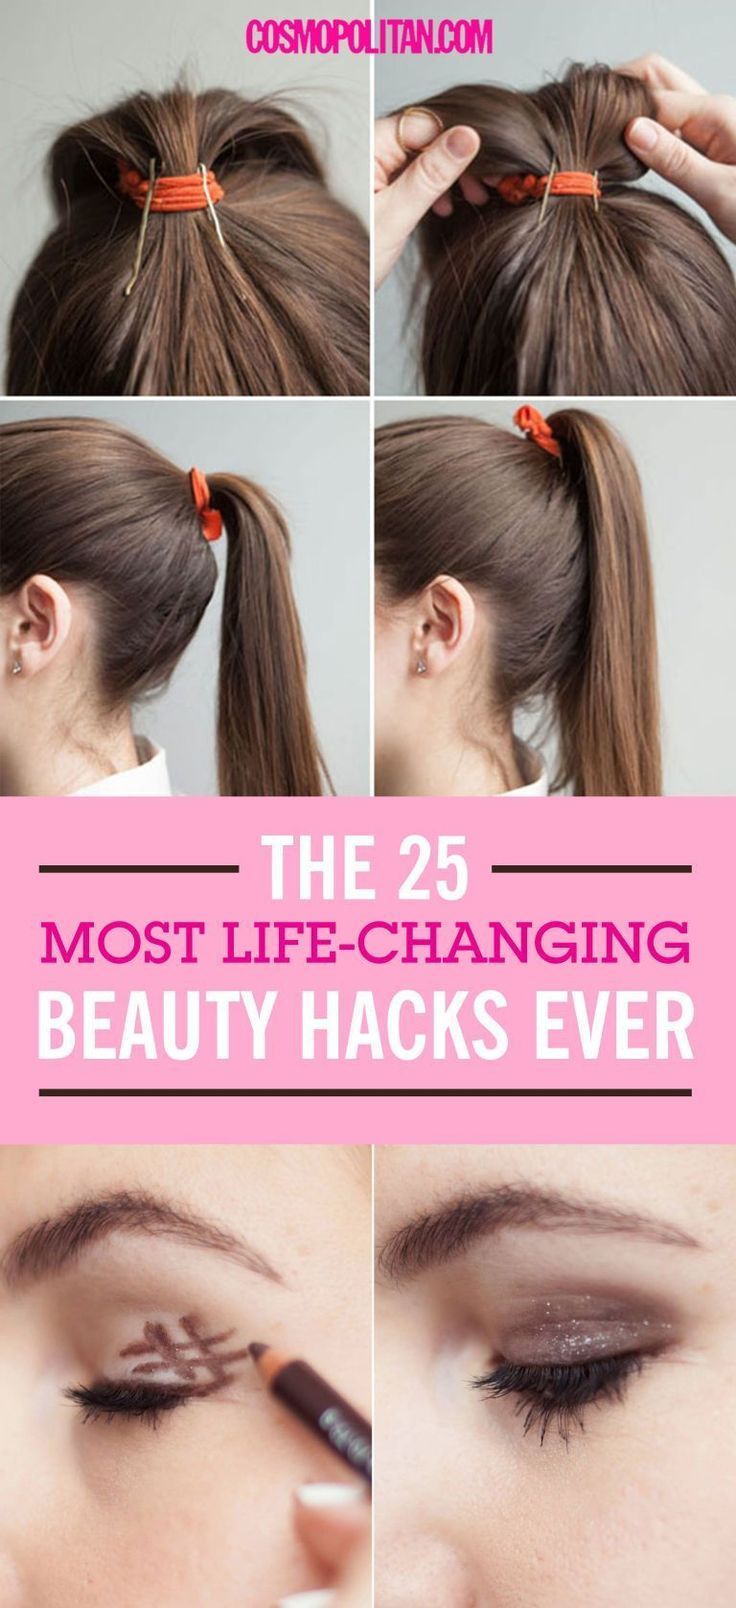 12 Awesome Health and Beauty Tips from Viral Posts - 12 Awesome Health and Beauty Tips from Viral Posts -   15 beauty Secrets for skin ideas